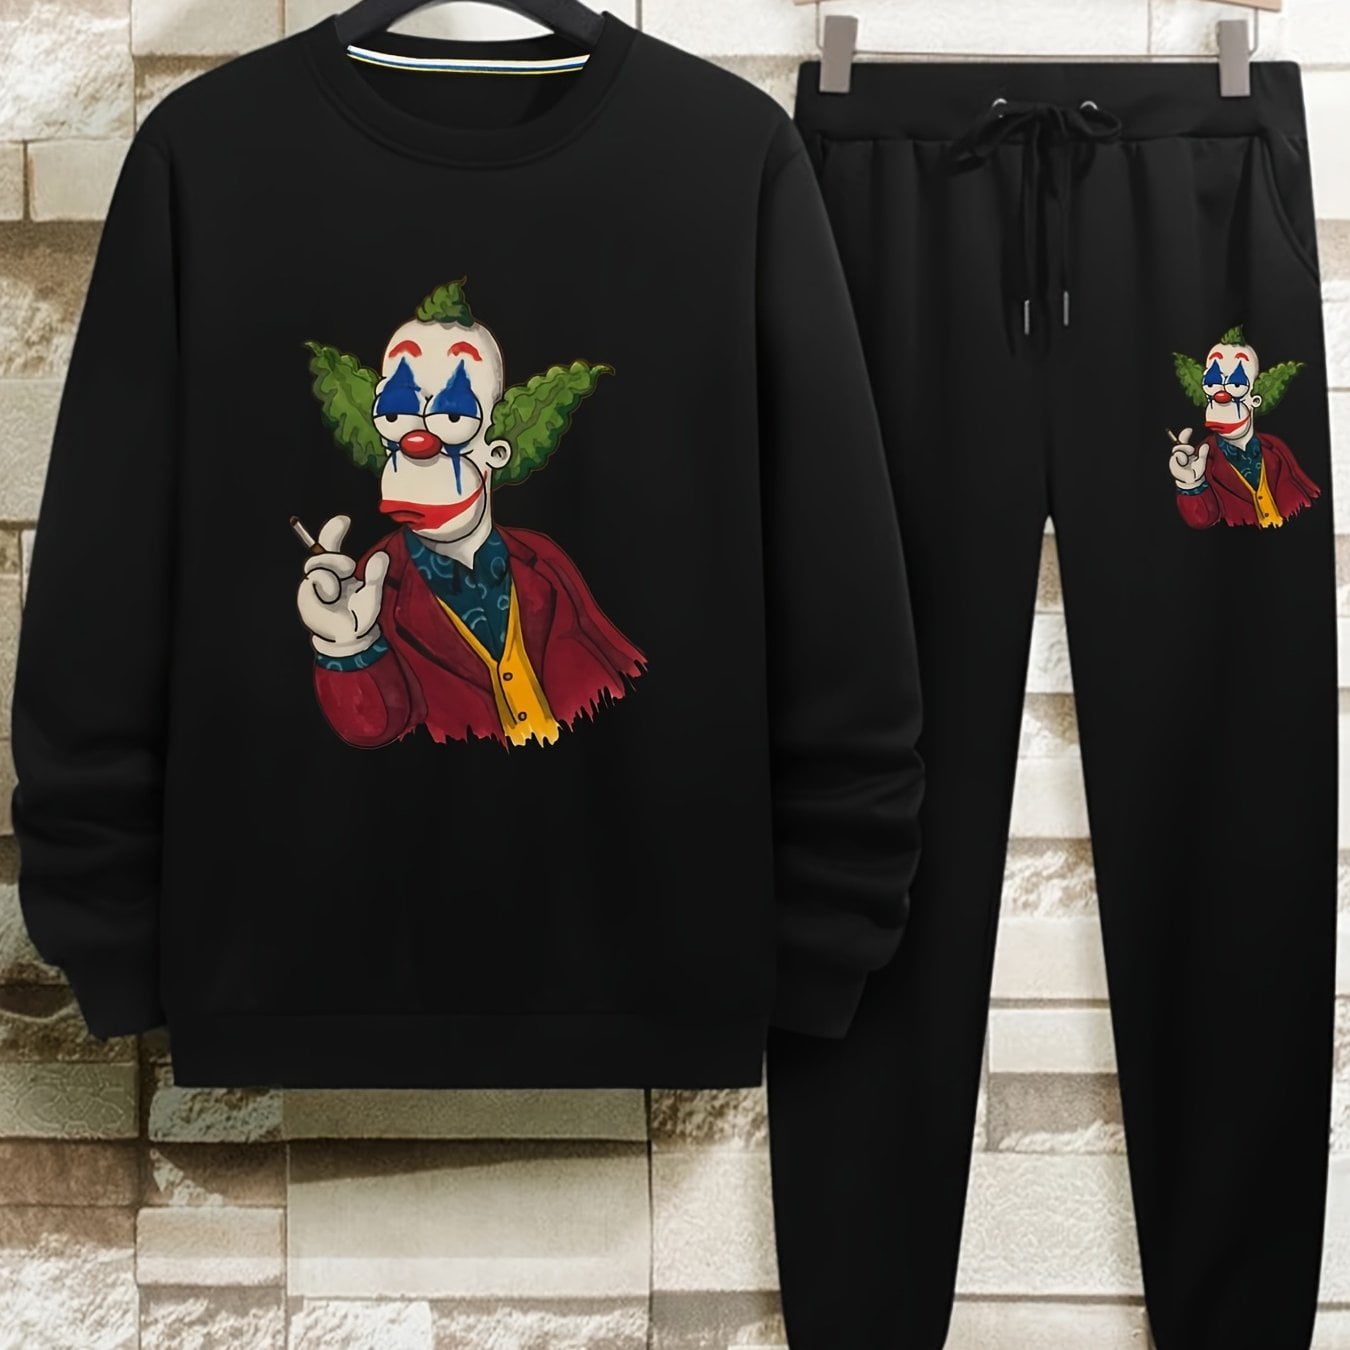 Men's Anime Clown Printed Round Neck Casual Outfits Sets 2 Piece Long  Sleeve Pullover Sweatshirt And Drawstring Sweatpants 